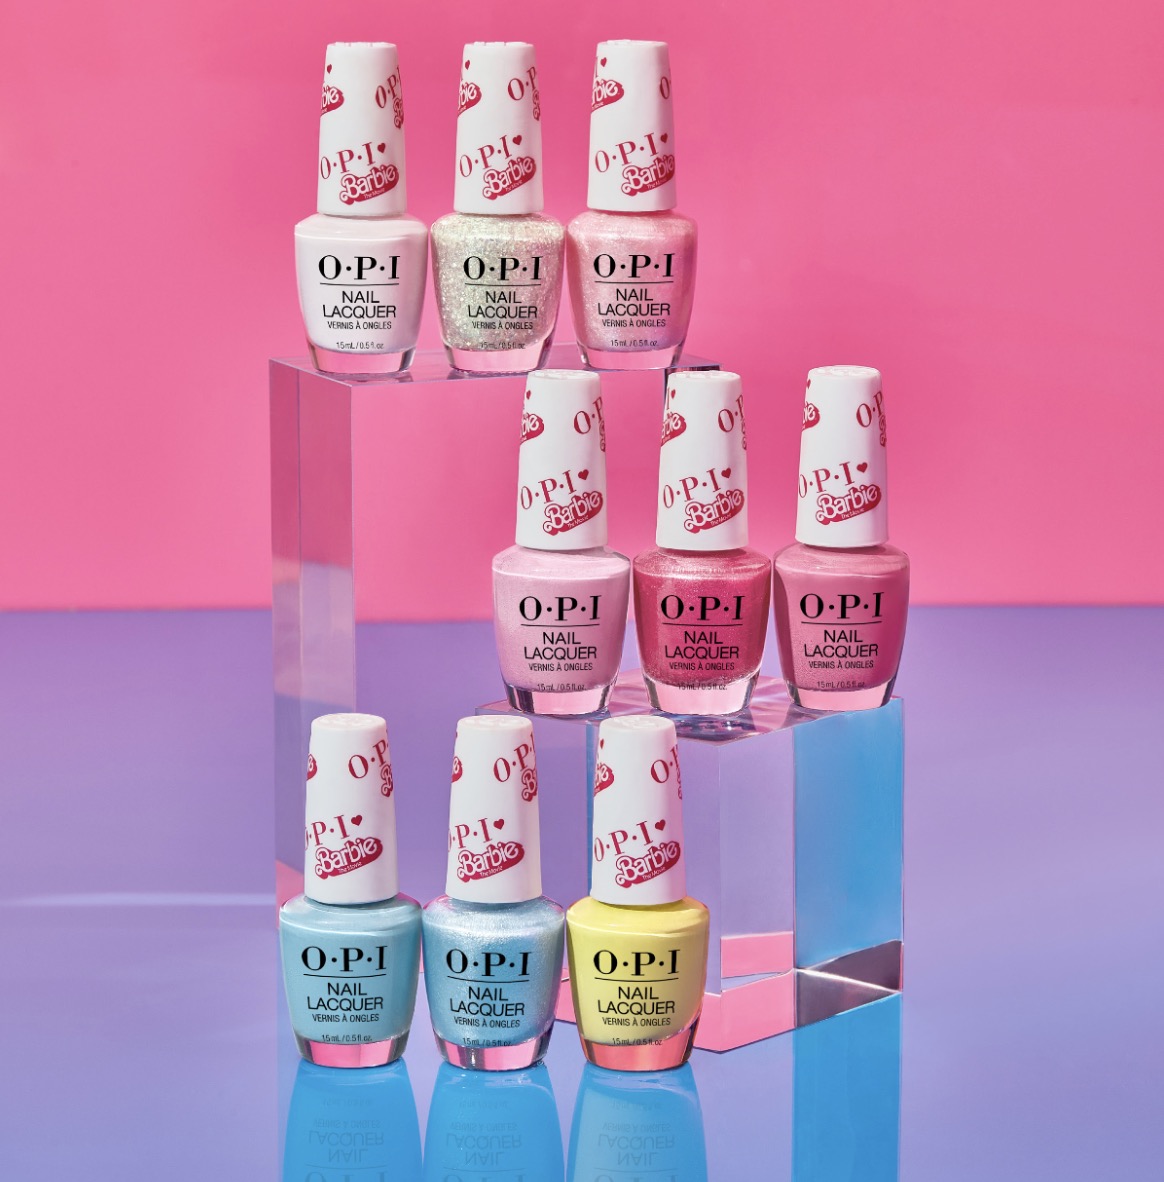 New Opi Barbie Nail Polish Collection